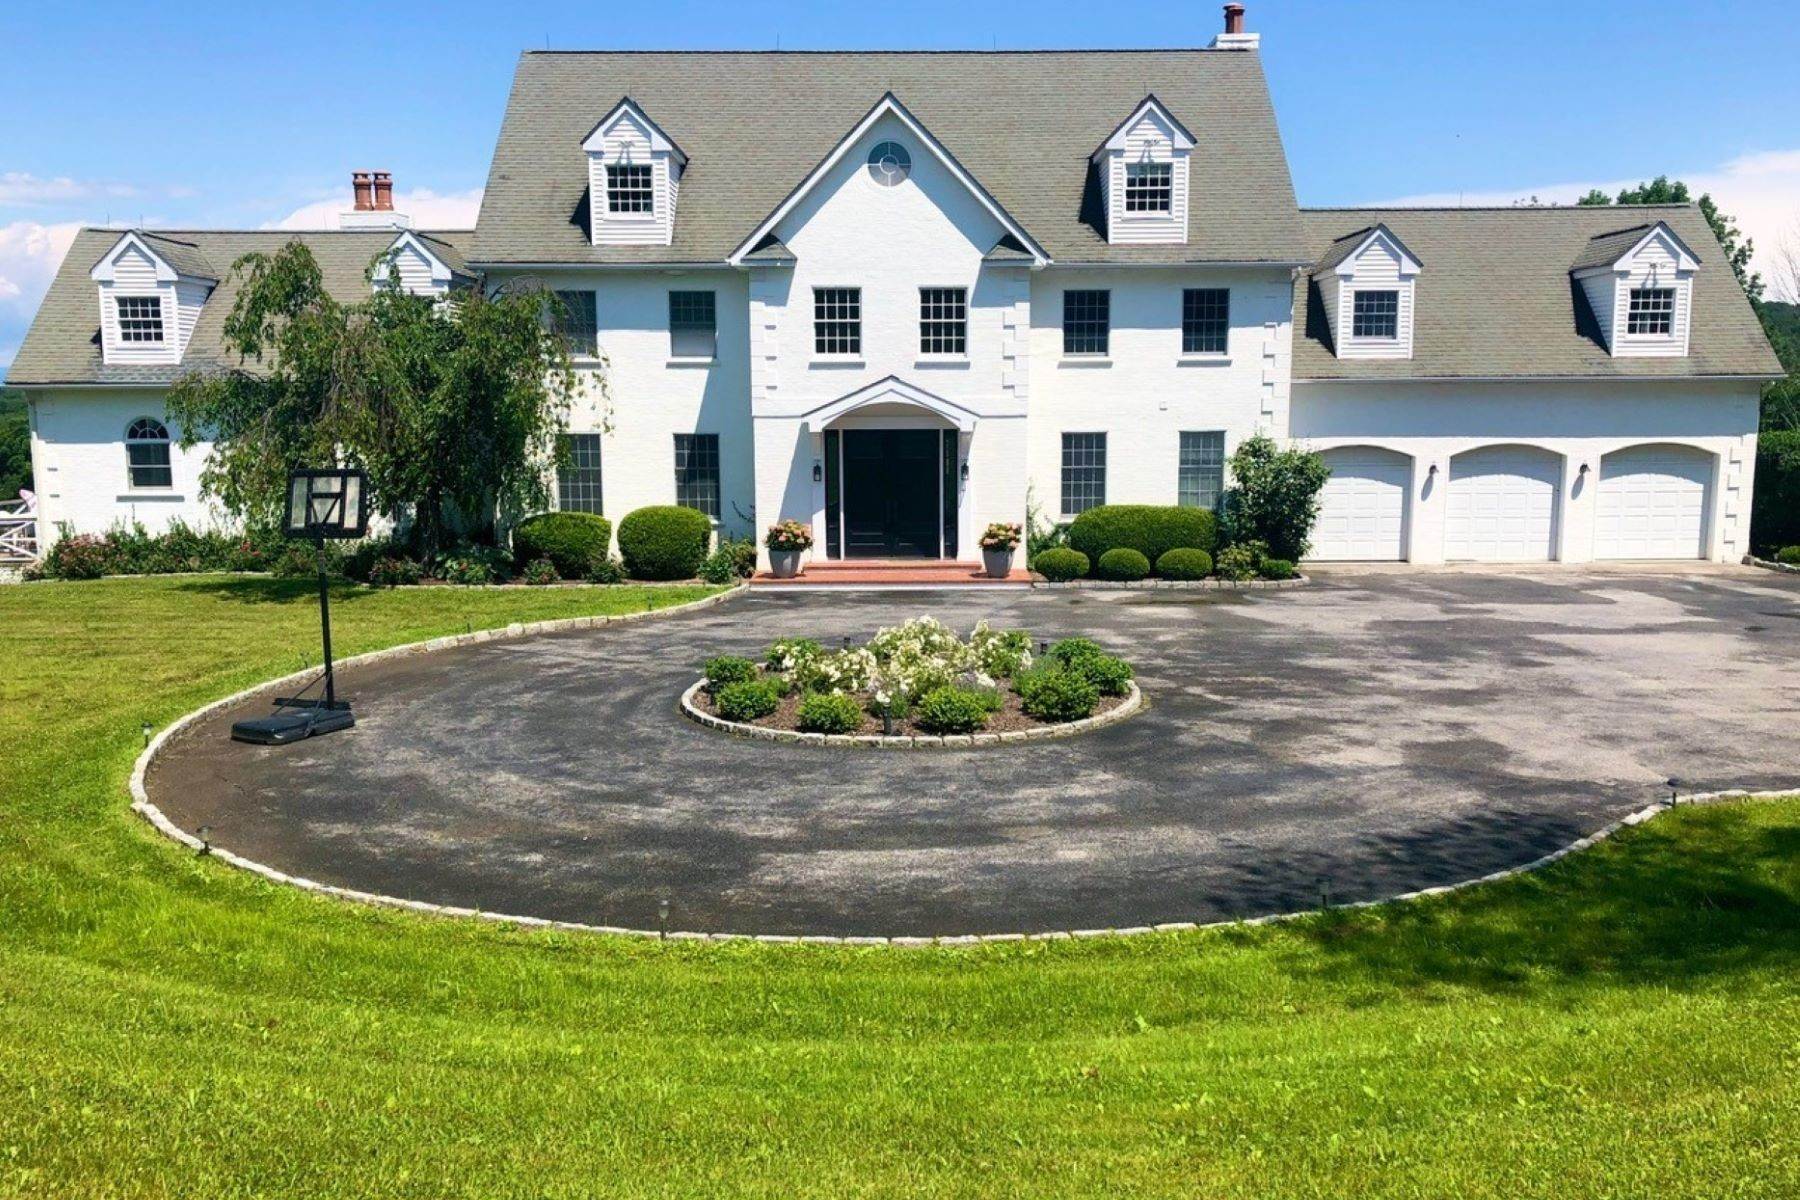 Single Family Homes for Sale at Private Country Sanctuary 20 Orchard Hill Dr Millbrook, New York 12545 United States